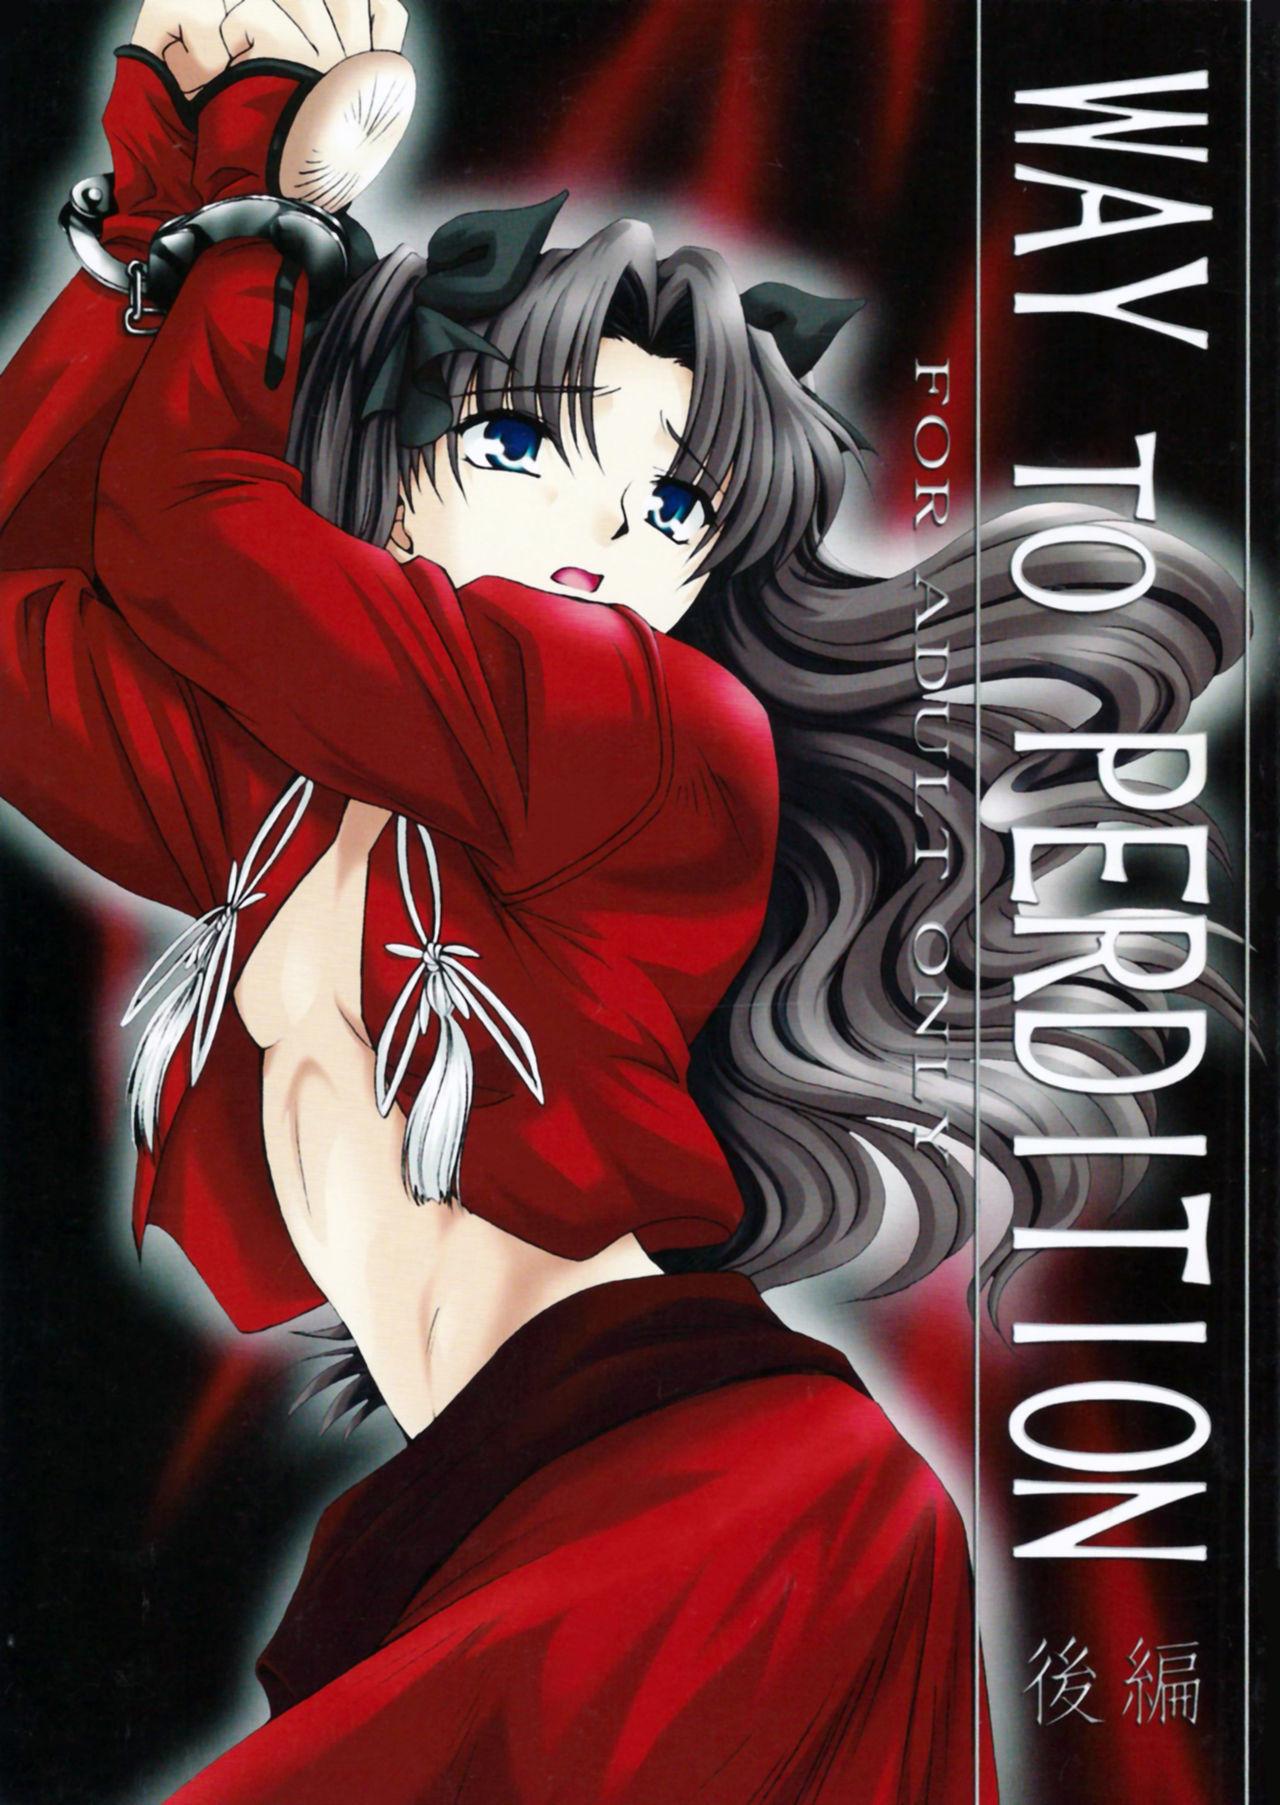 Interacial WAY TO PERDITION Kouhen - Fate stay night Show - Picture 1